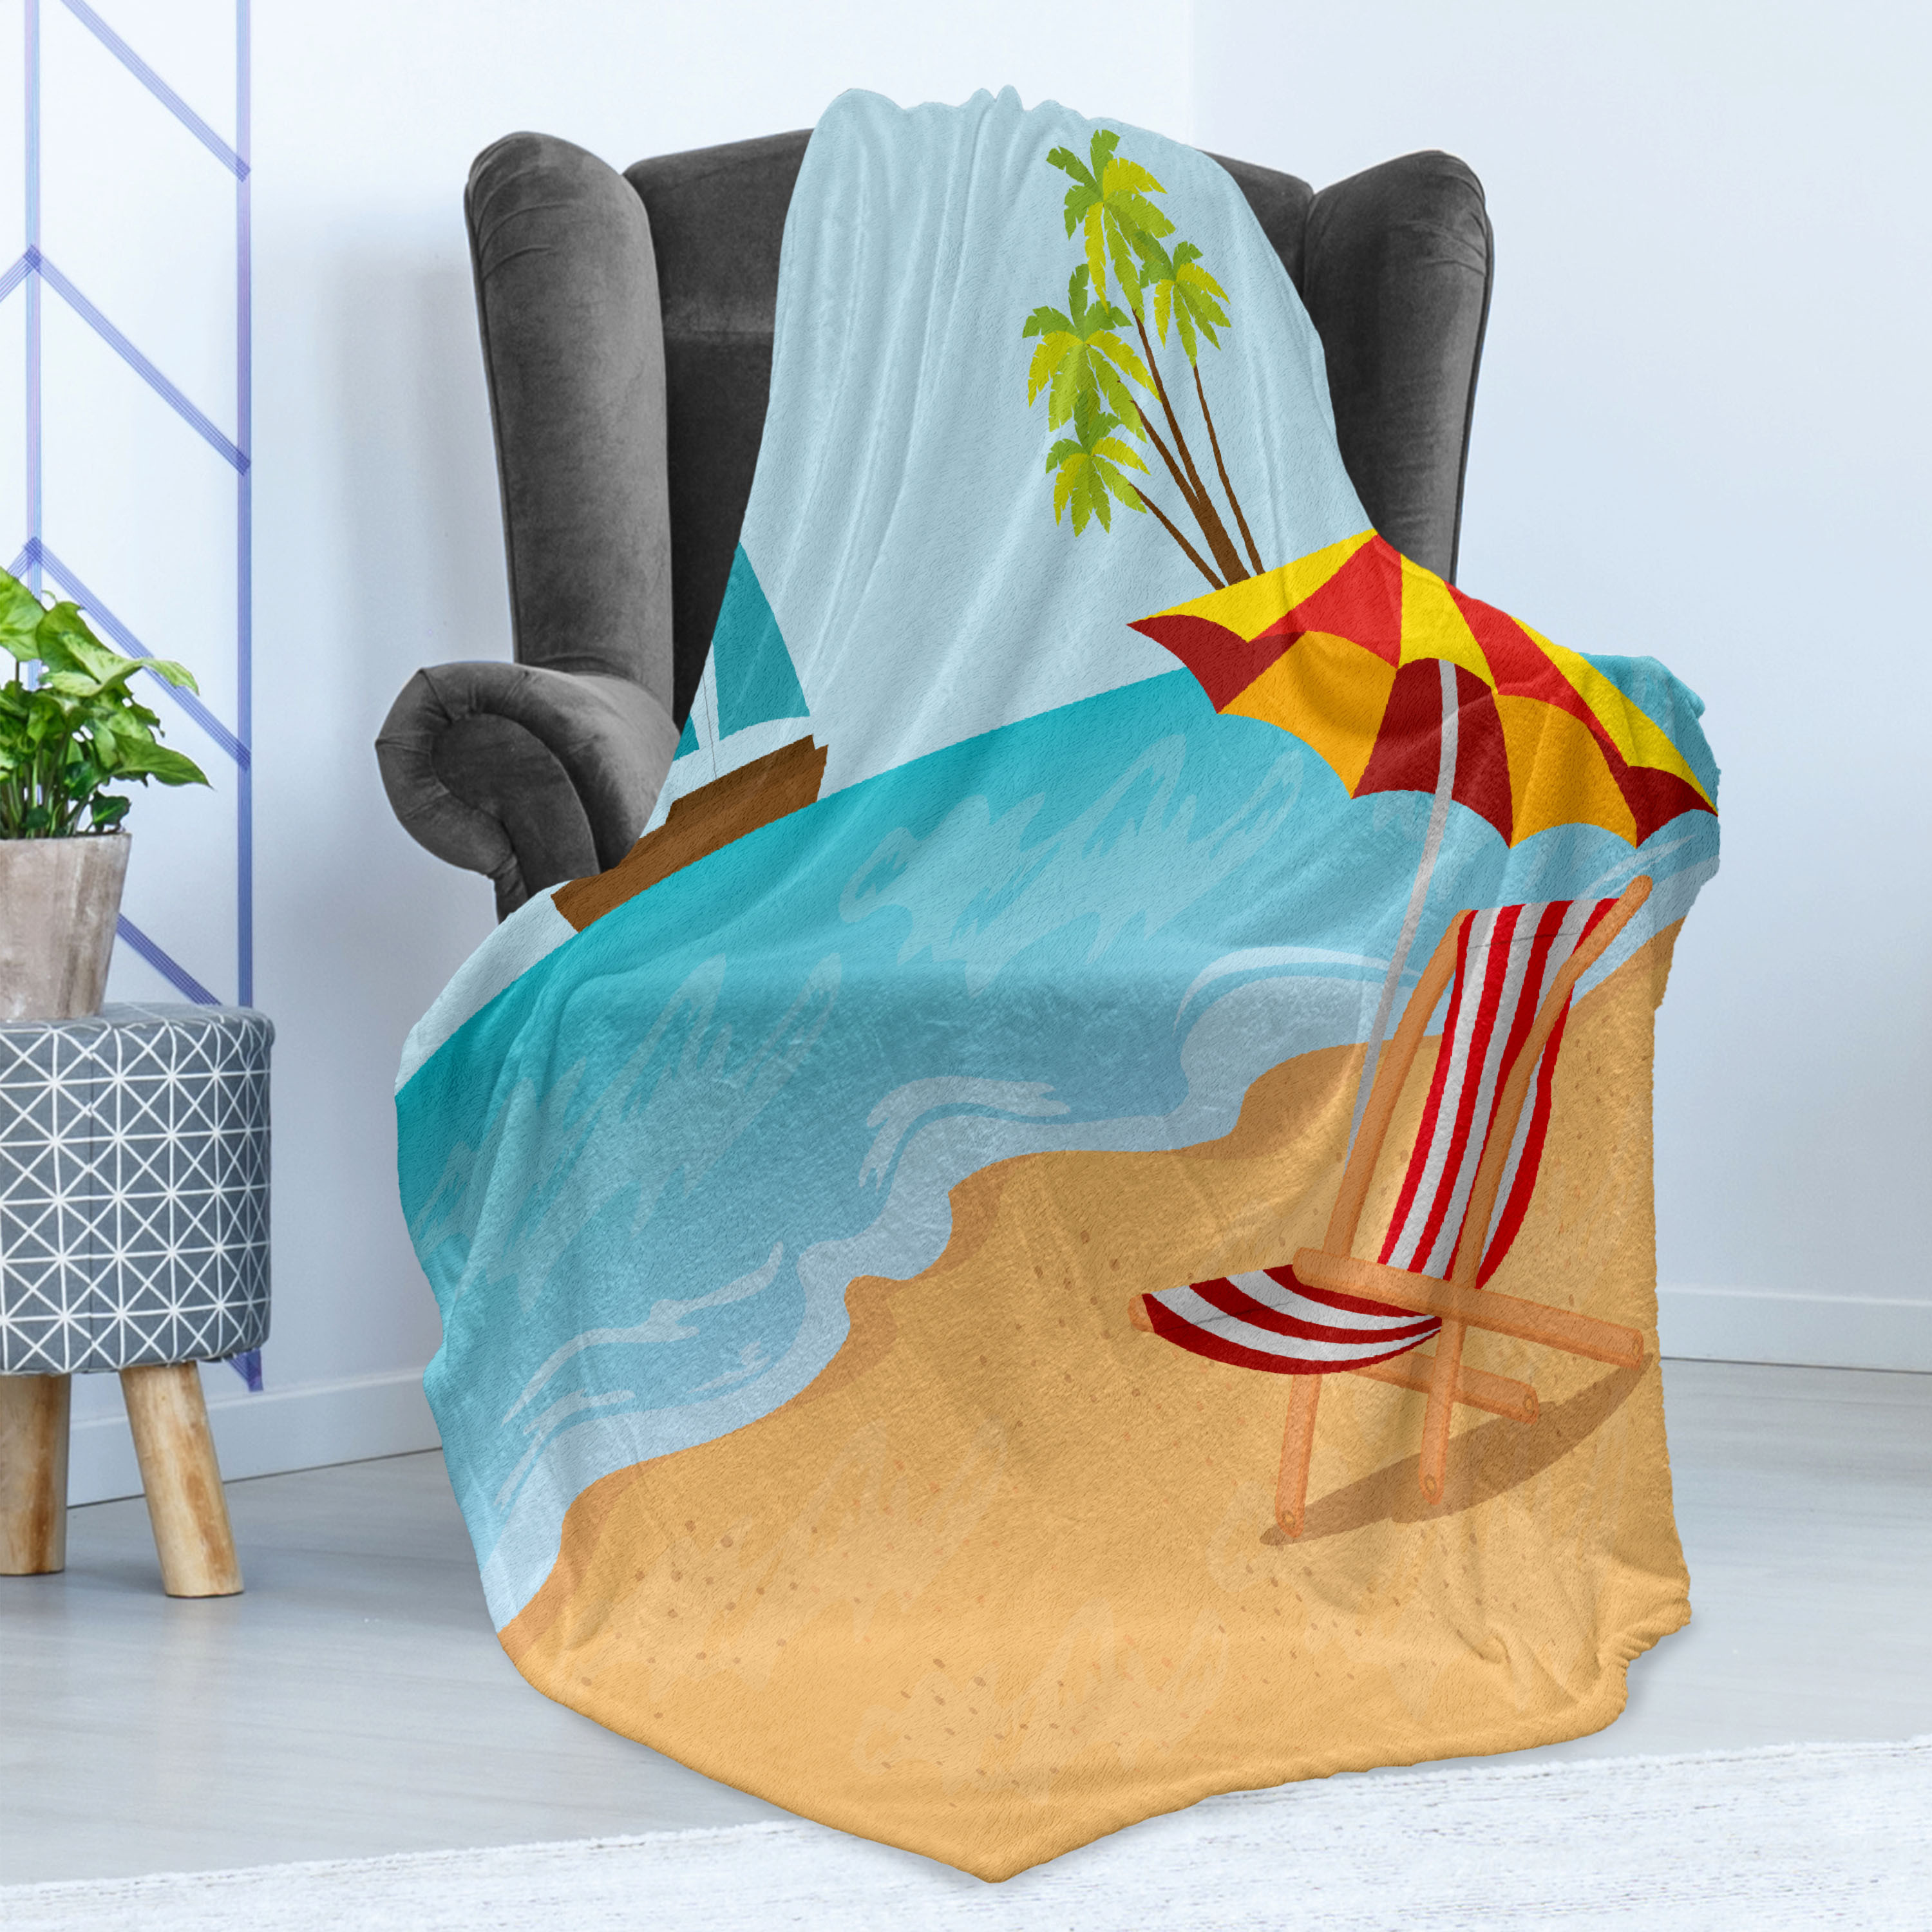 Graphic Beach Soft Flannel Fleece Blanket, Summer Leisure Scene at Coast Ocean Sailboat Parasol and Chair Cartoon Style, Cozy Plush for Indoor and Outdoor Use, 50" x 60", Multicolor, by Ambesonne - image 4 of 5